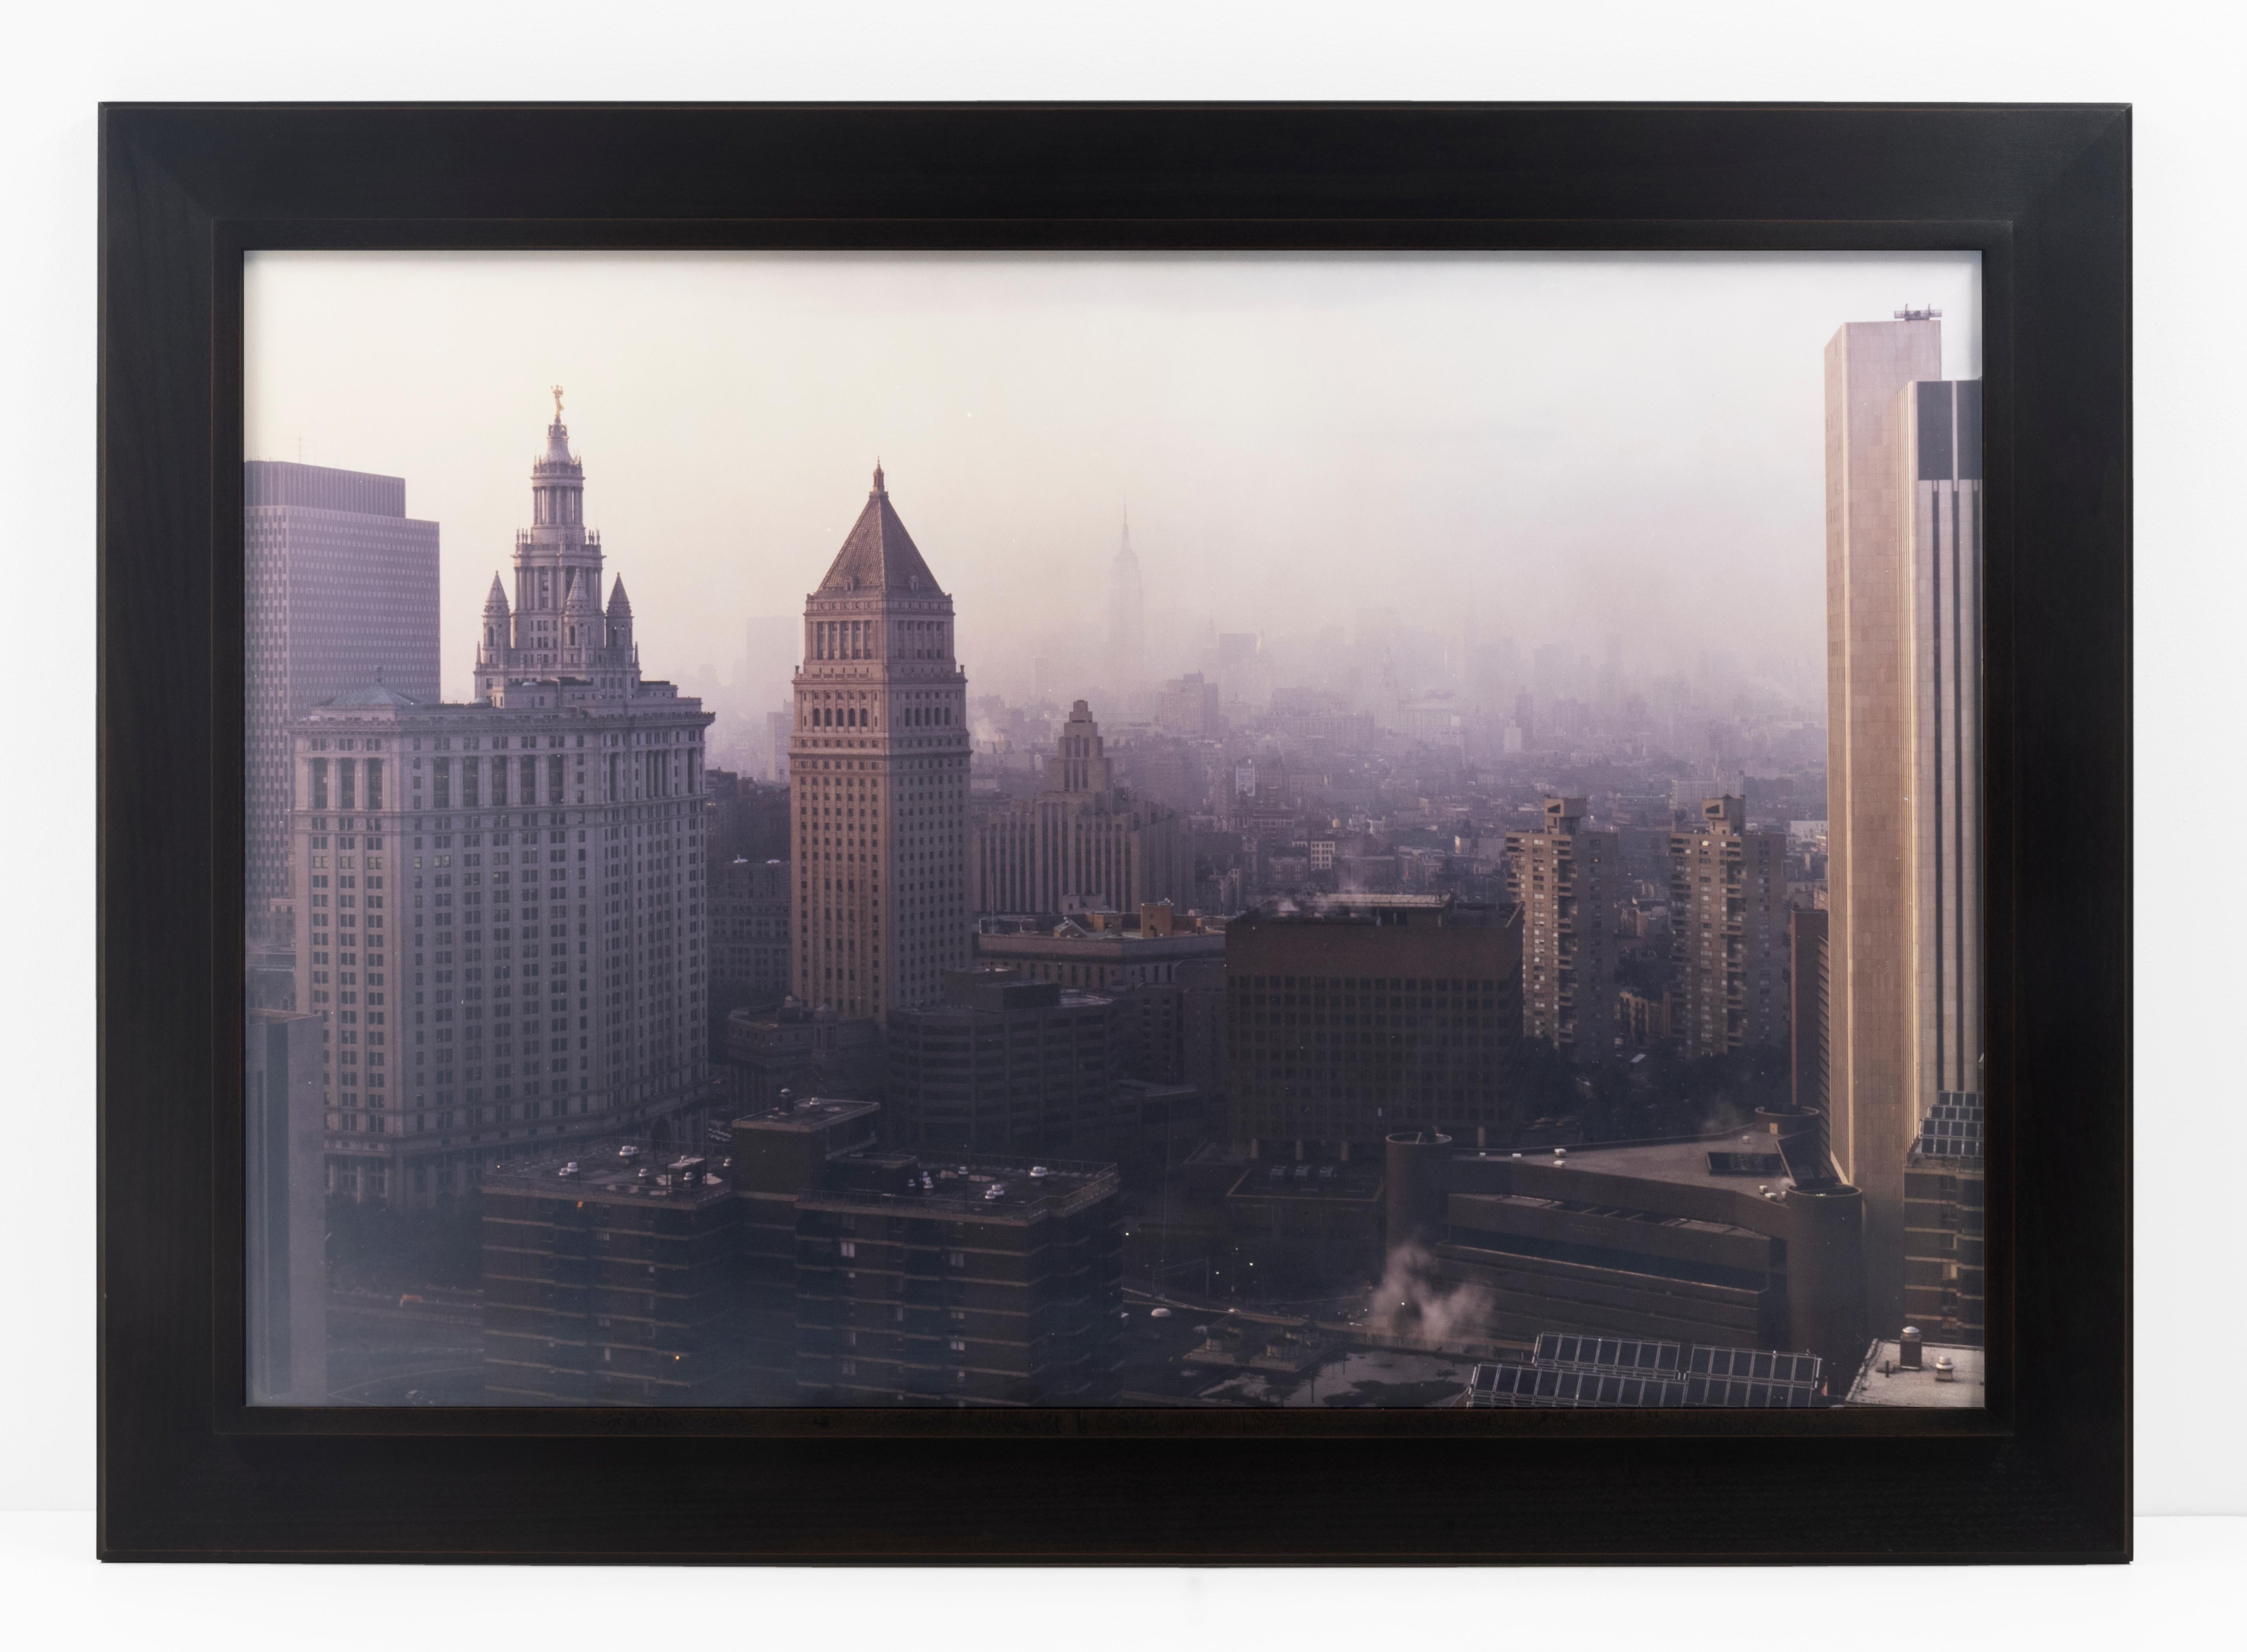 The Civic Center with Midtown in Background
1983

Signed on label, verso

Chromogenic print (Diptych)

25 x 35 inches, each

Contact gallery for price.

This work is offered by ClampArt in New York City.